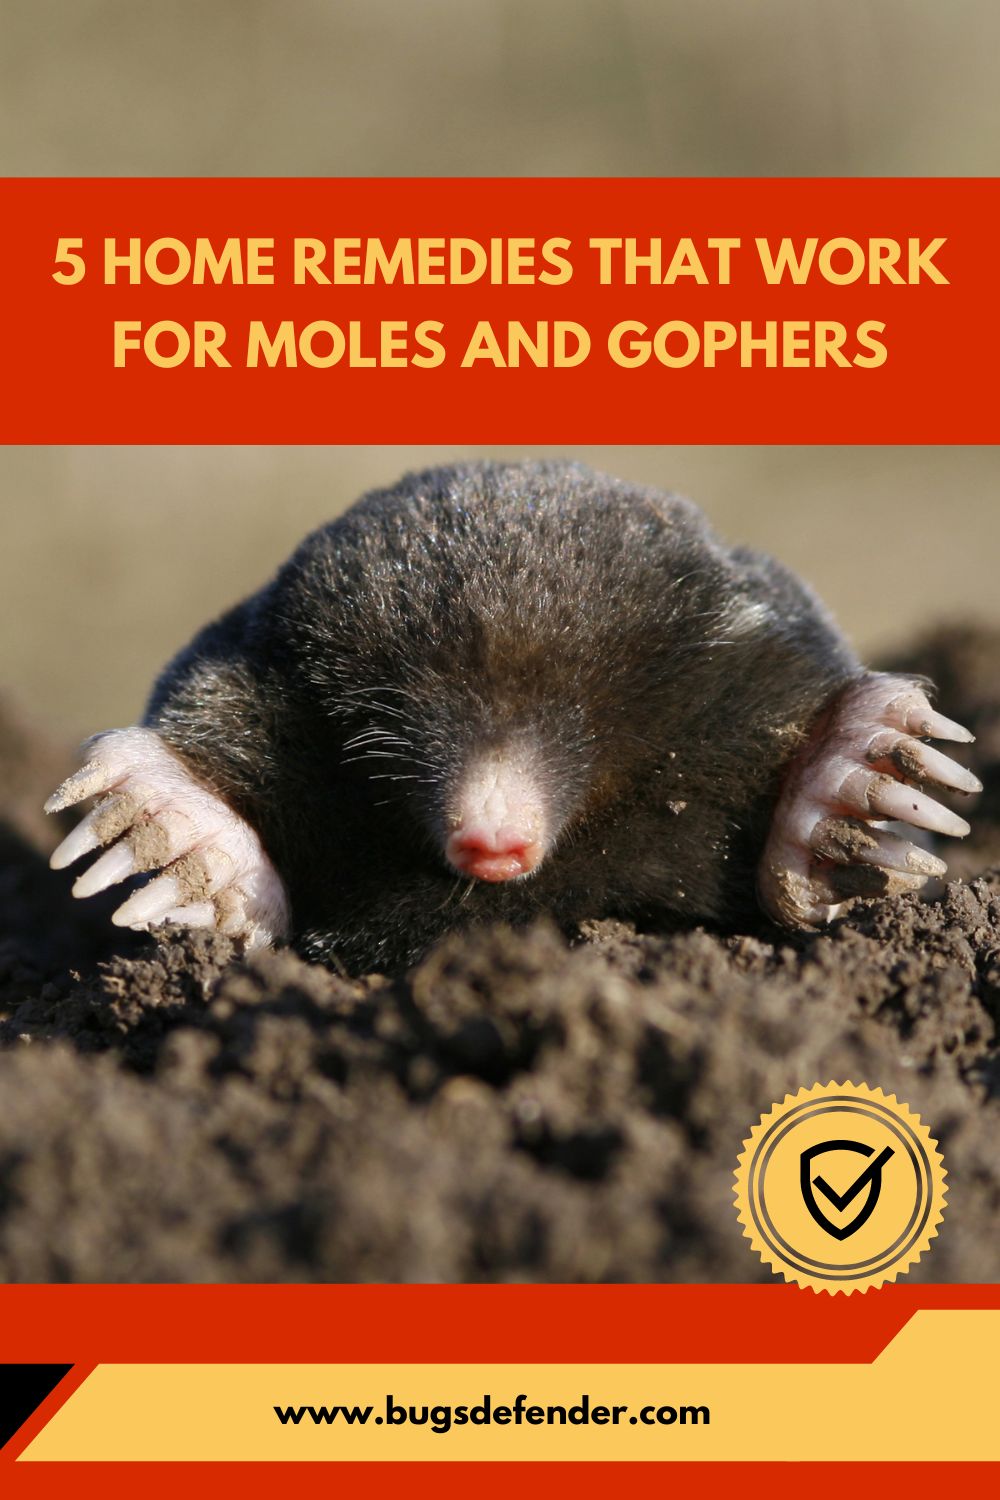 Home Remedies That Work For Moles And Gophers pin2